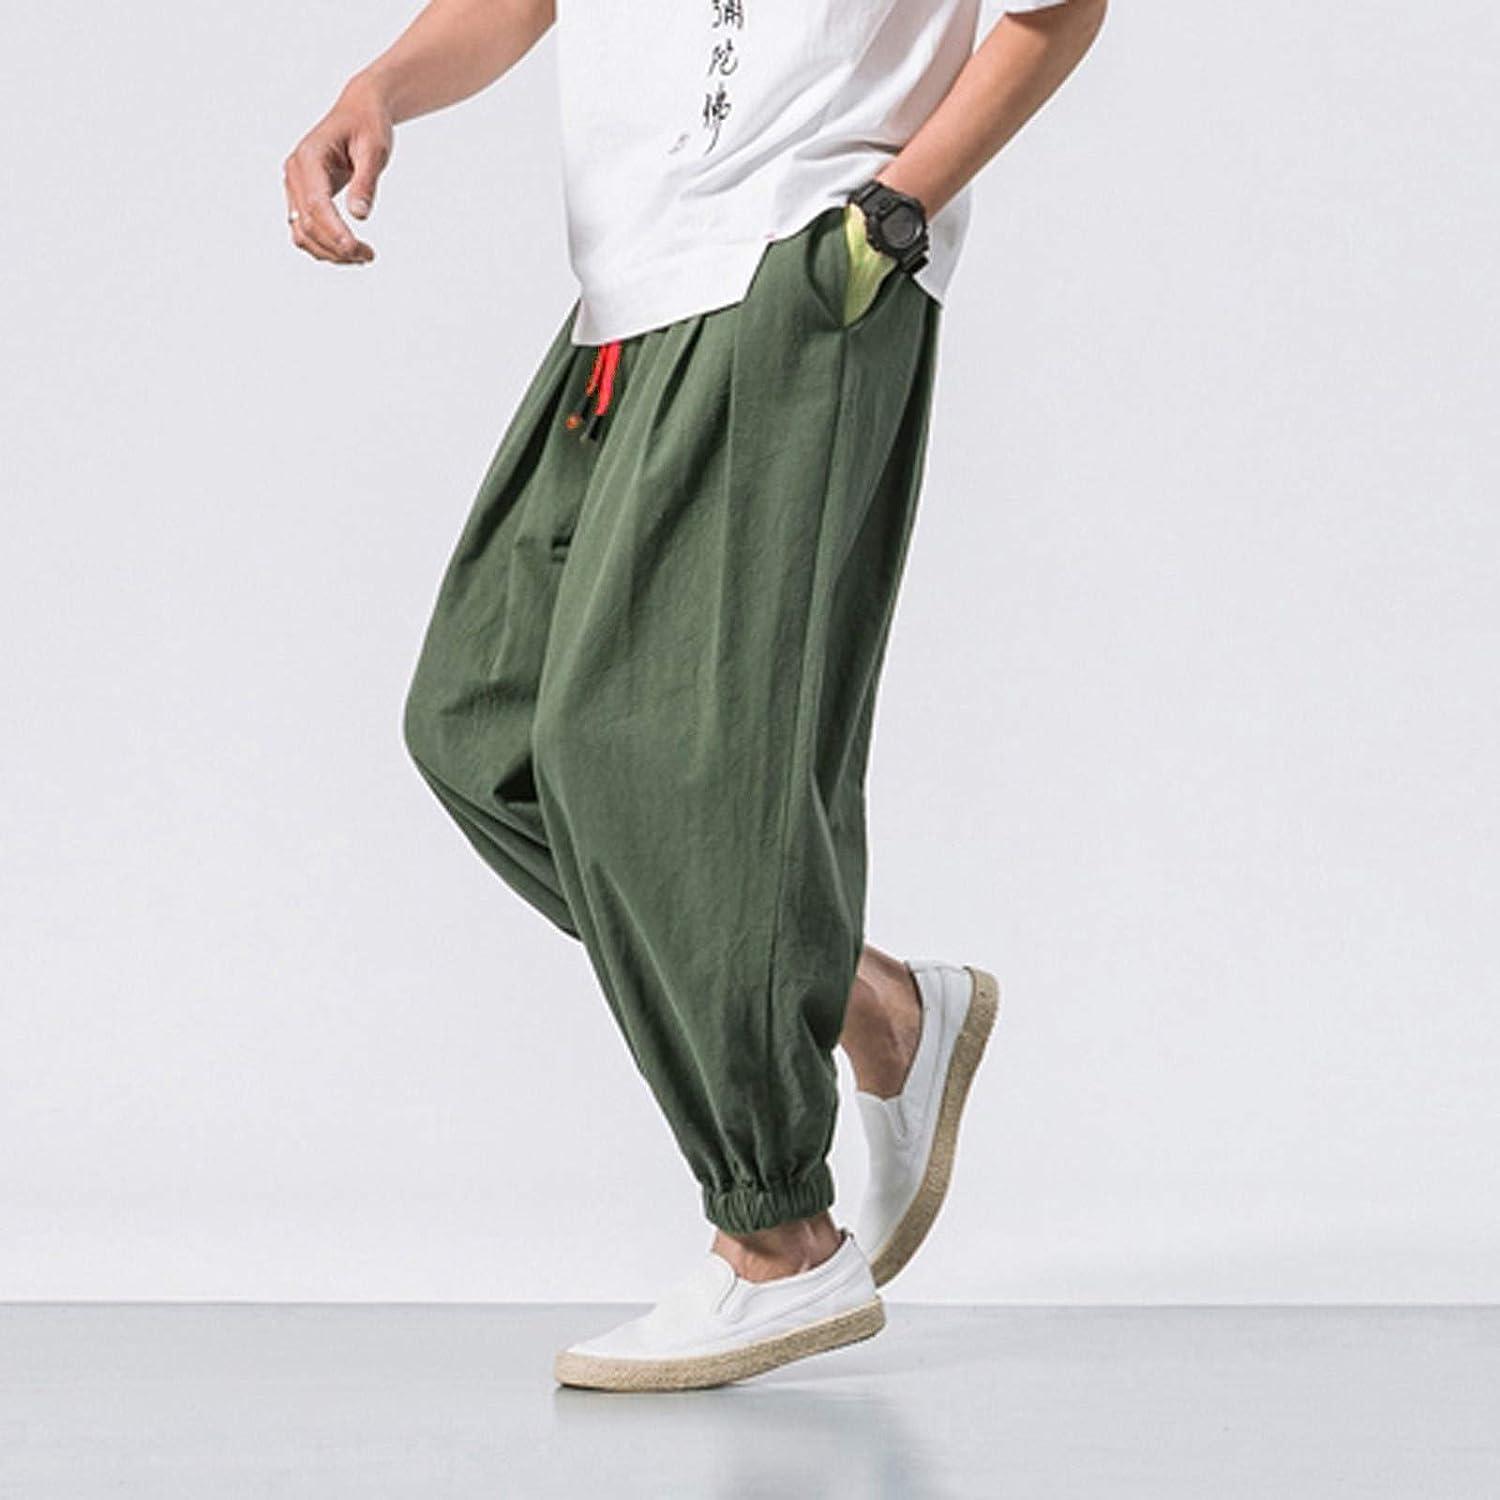 Pants for Men Drawstring Men's Fashion Casual Solid Color Loose Plus Size  Pants Wide Leg Elasticated Pants Large Army Green